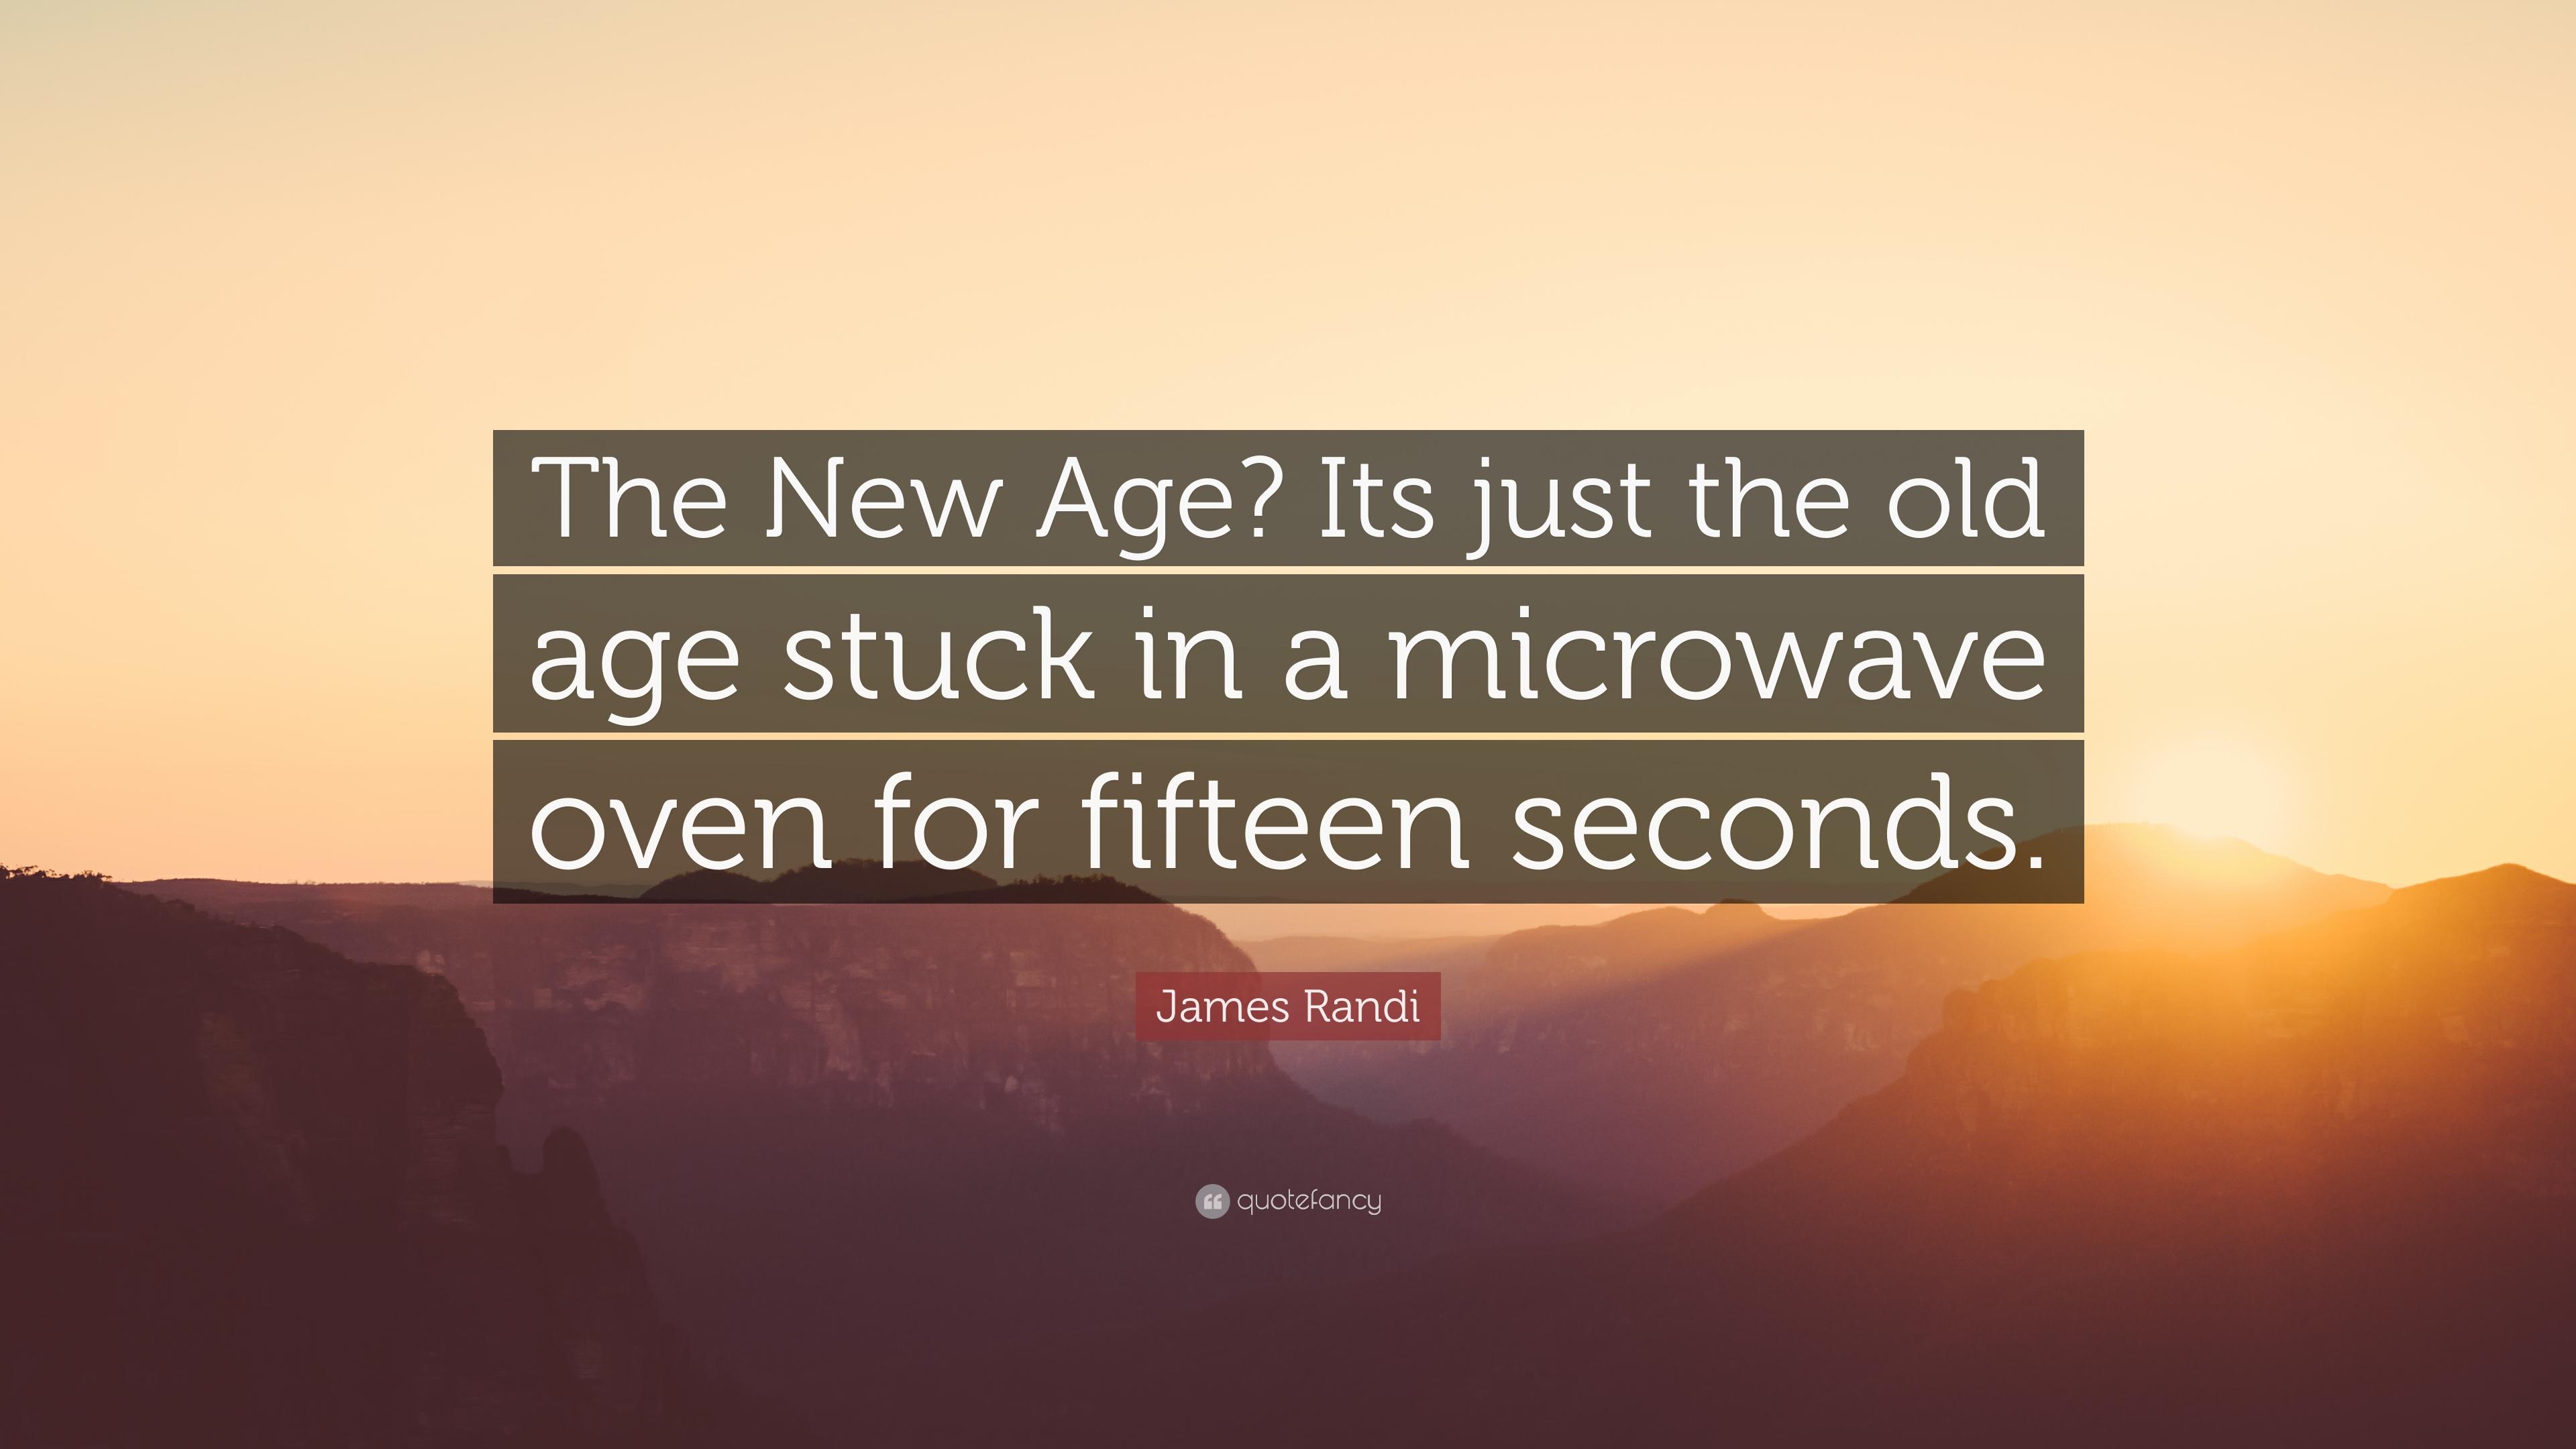 James Randi Quote: “The New Age? Its just the old age stuck in a